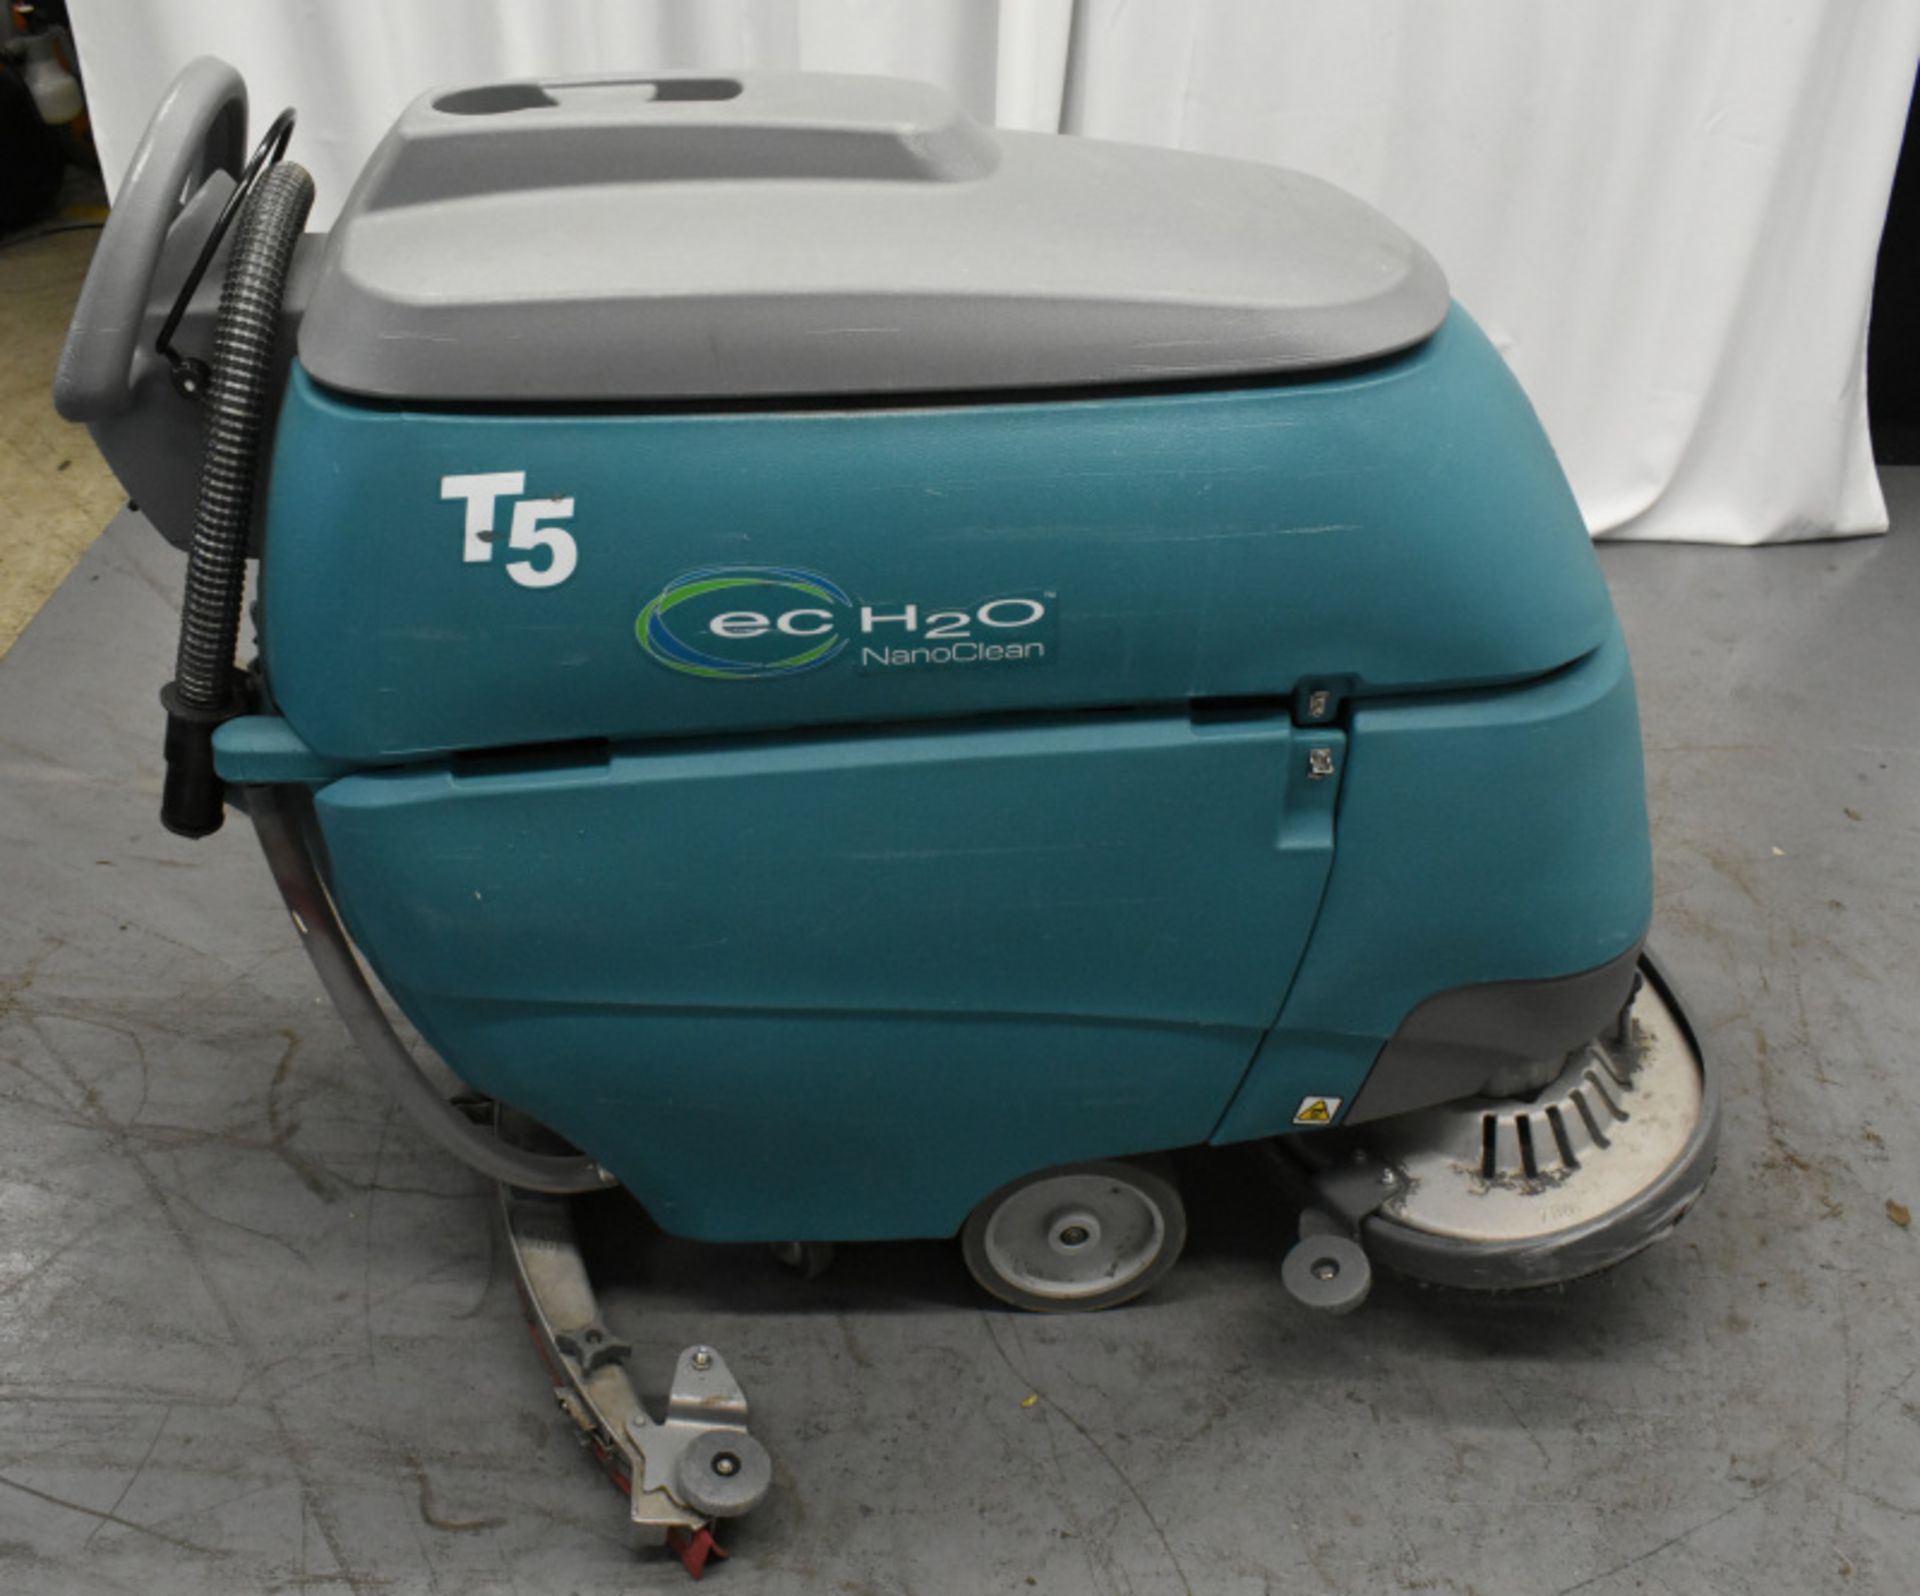 Tennant T5 ECH20 NanoClean, comes with key, powers up - 674 hours - Image 8 of 9